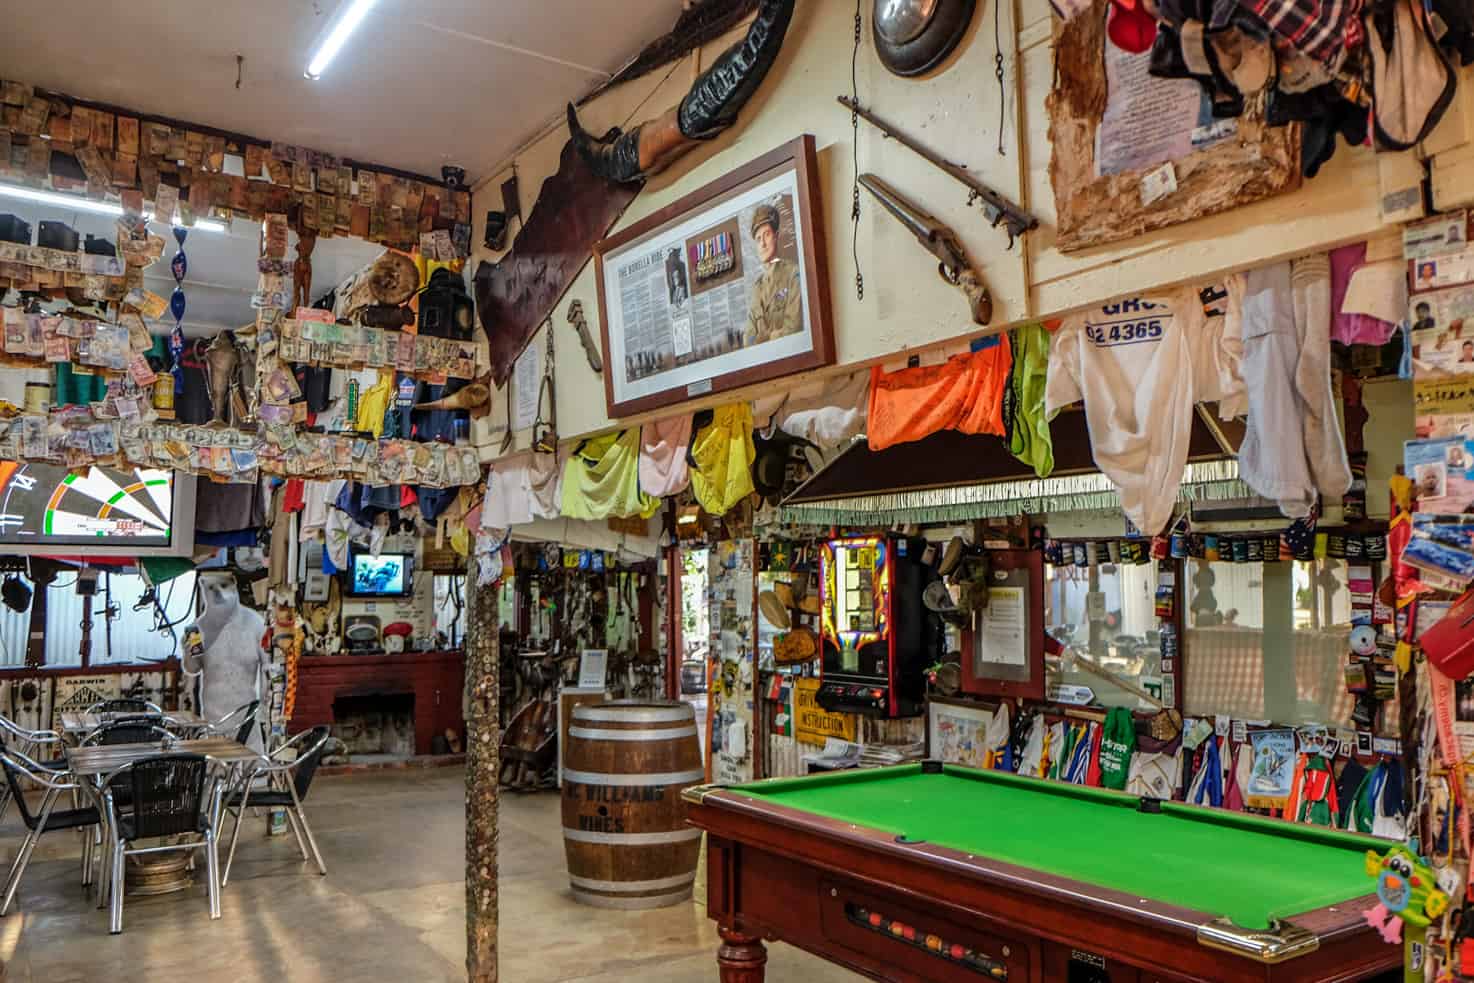 The Daly Waters Pub in the Australian Outback who walls are covered in t-shirts, ID cards, money and war memorabilia. 